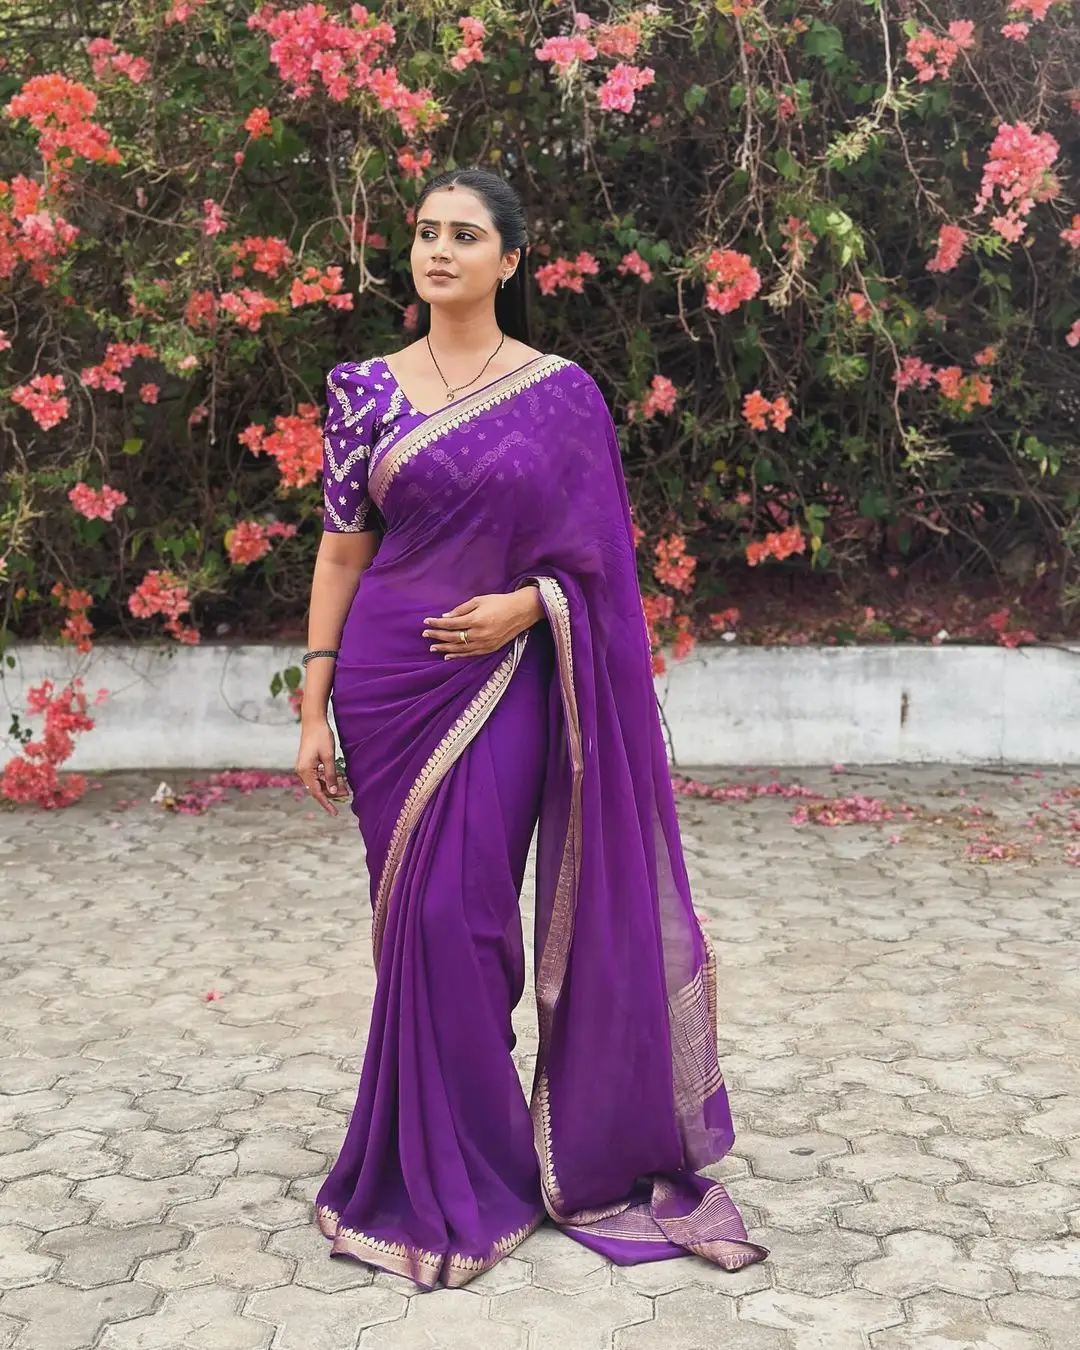 INDIAN GIRL KAVYA SHREE IN TRADITIONAL VIOLET SAREE BLOUSE 3